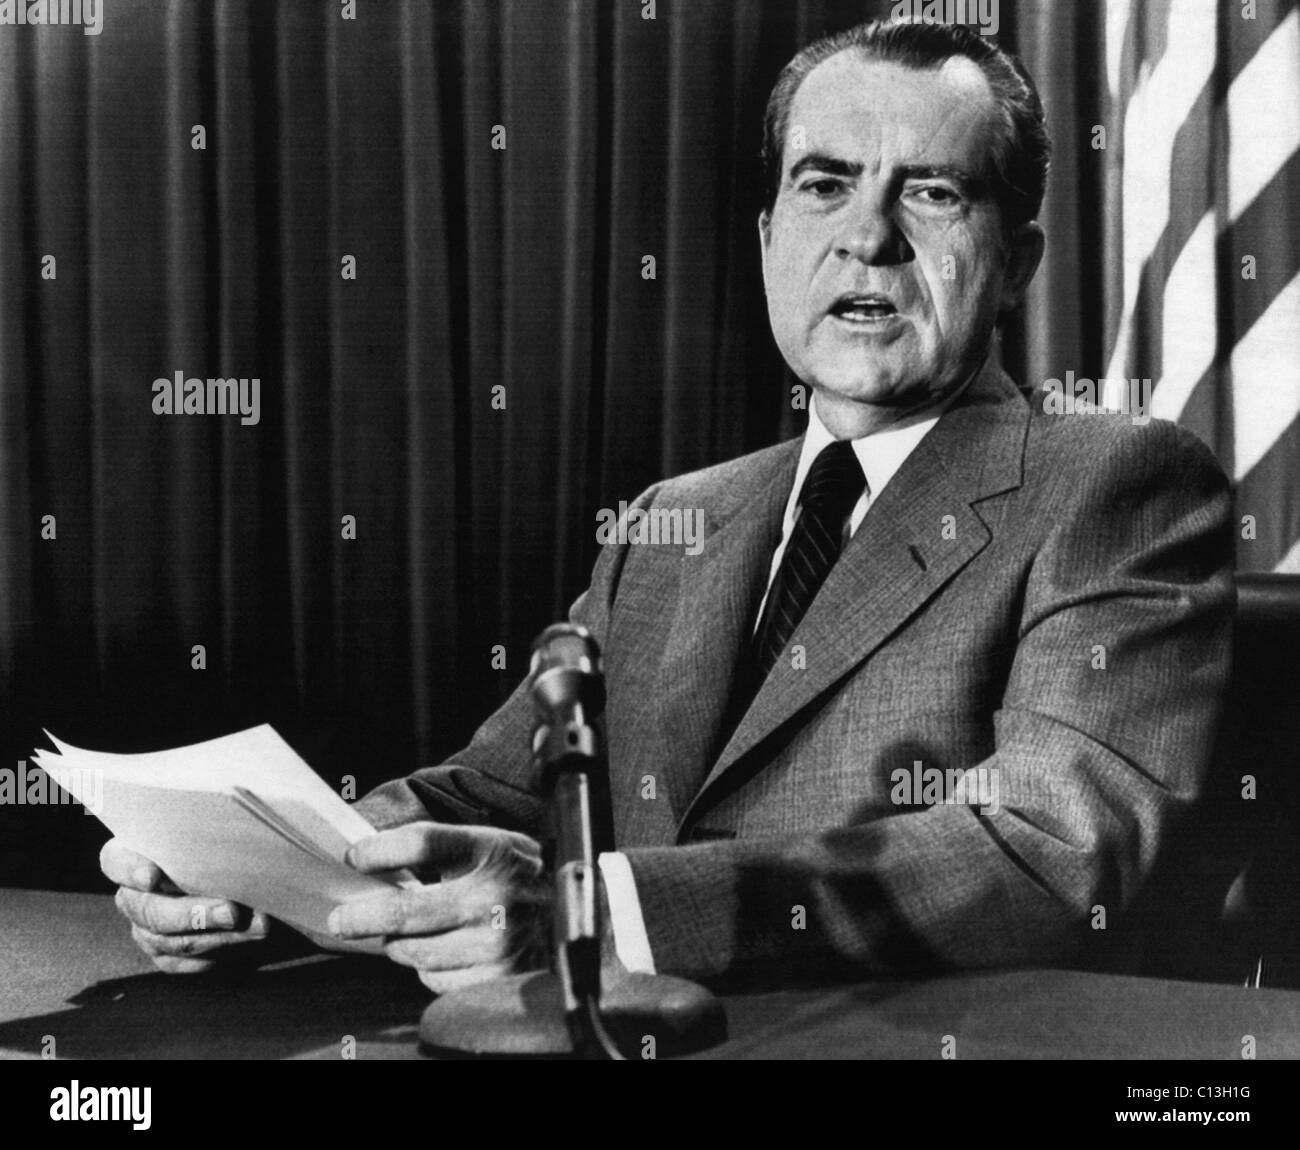 1971 US Presidency.  President Richard Nixon announcing Supreme Court Justice nominees Lewis Powell and William Rehnquist, 1971 Stock Photo